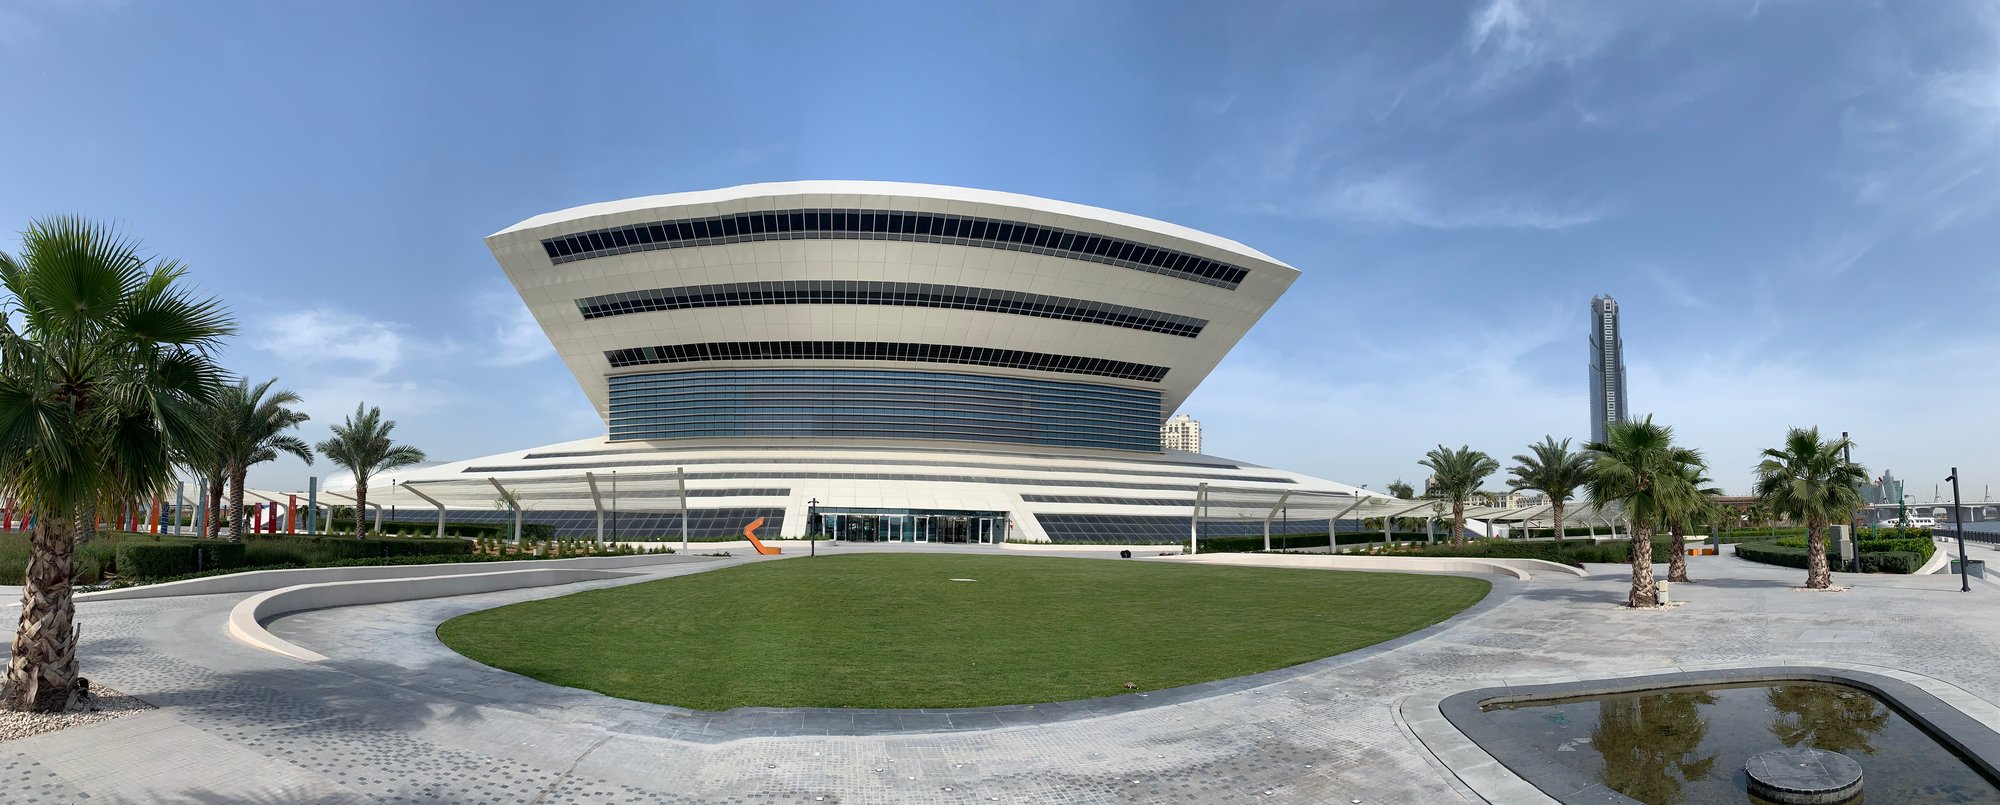 MBRL Panorama